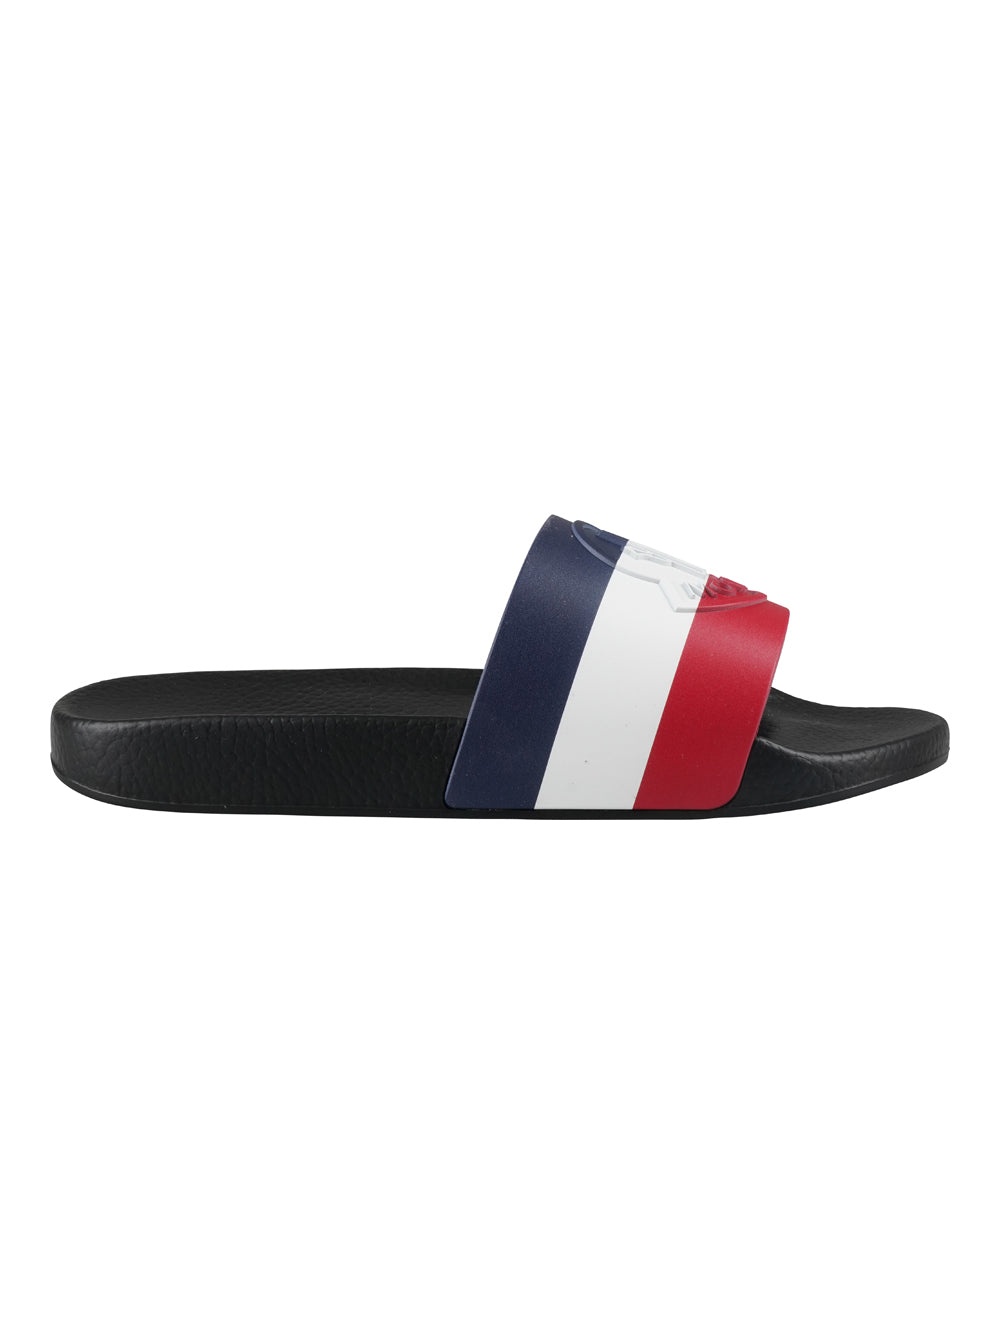 MONCLER MULTICOLOR SLIPPERS - 4